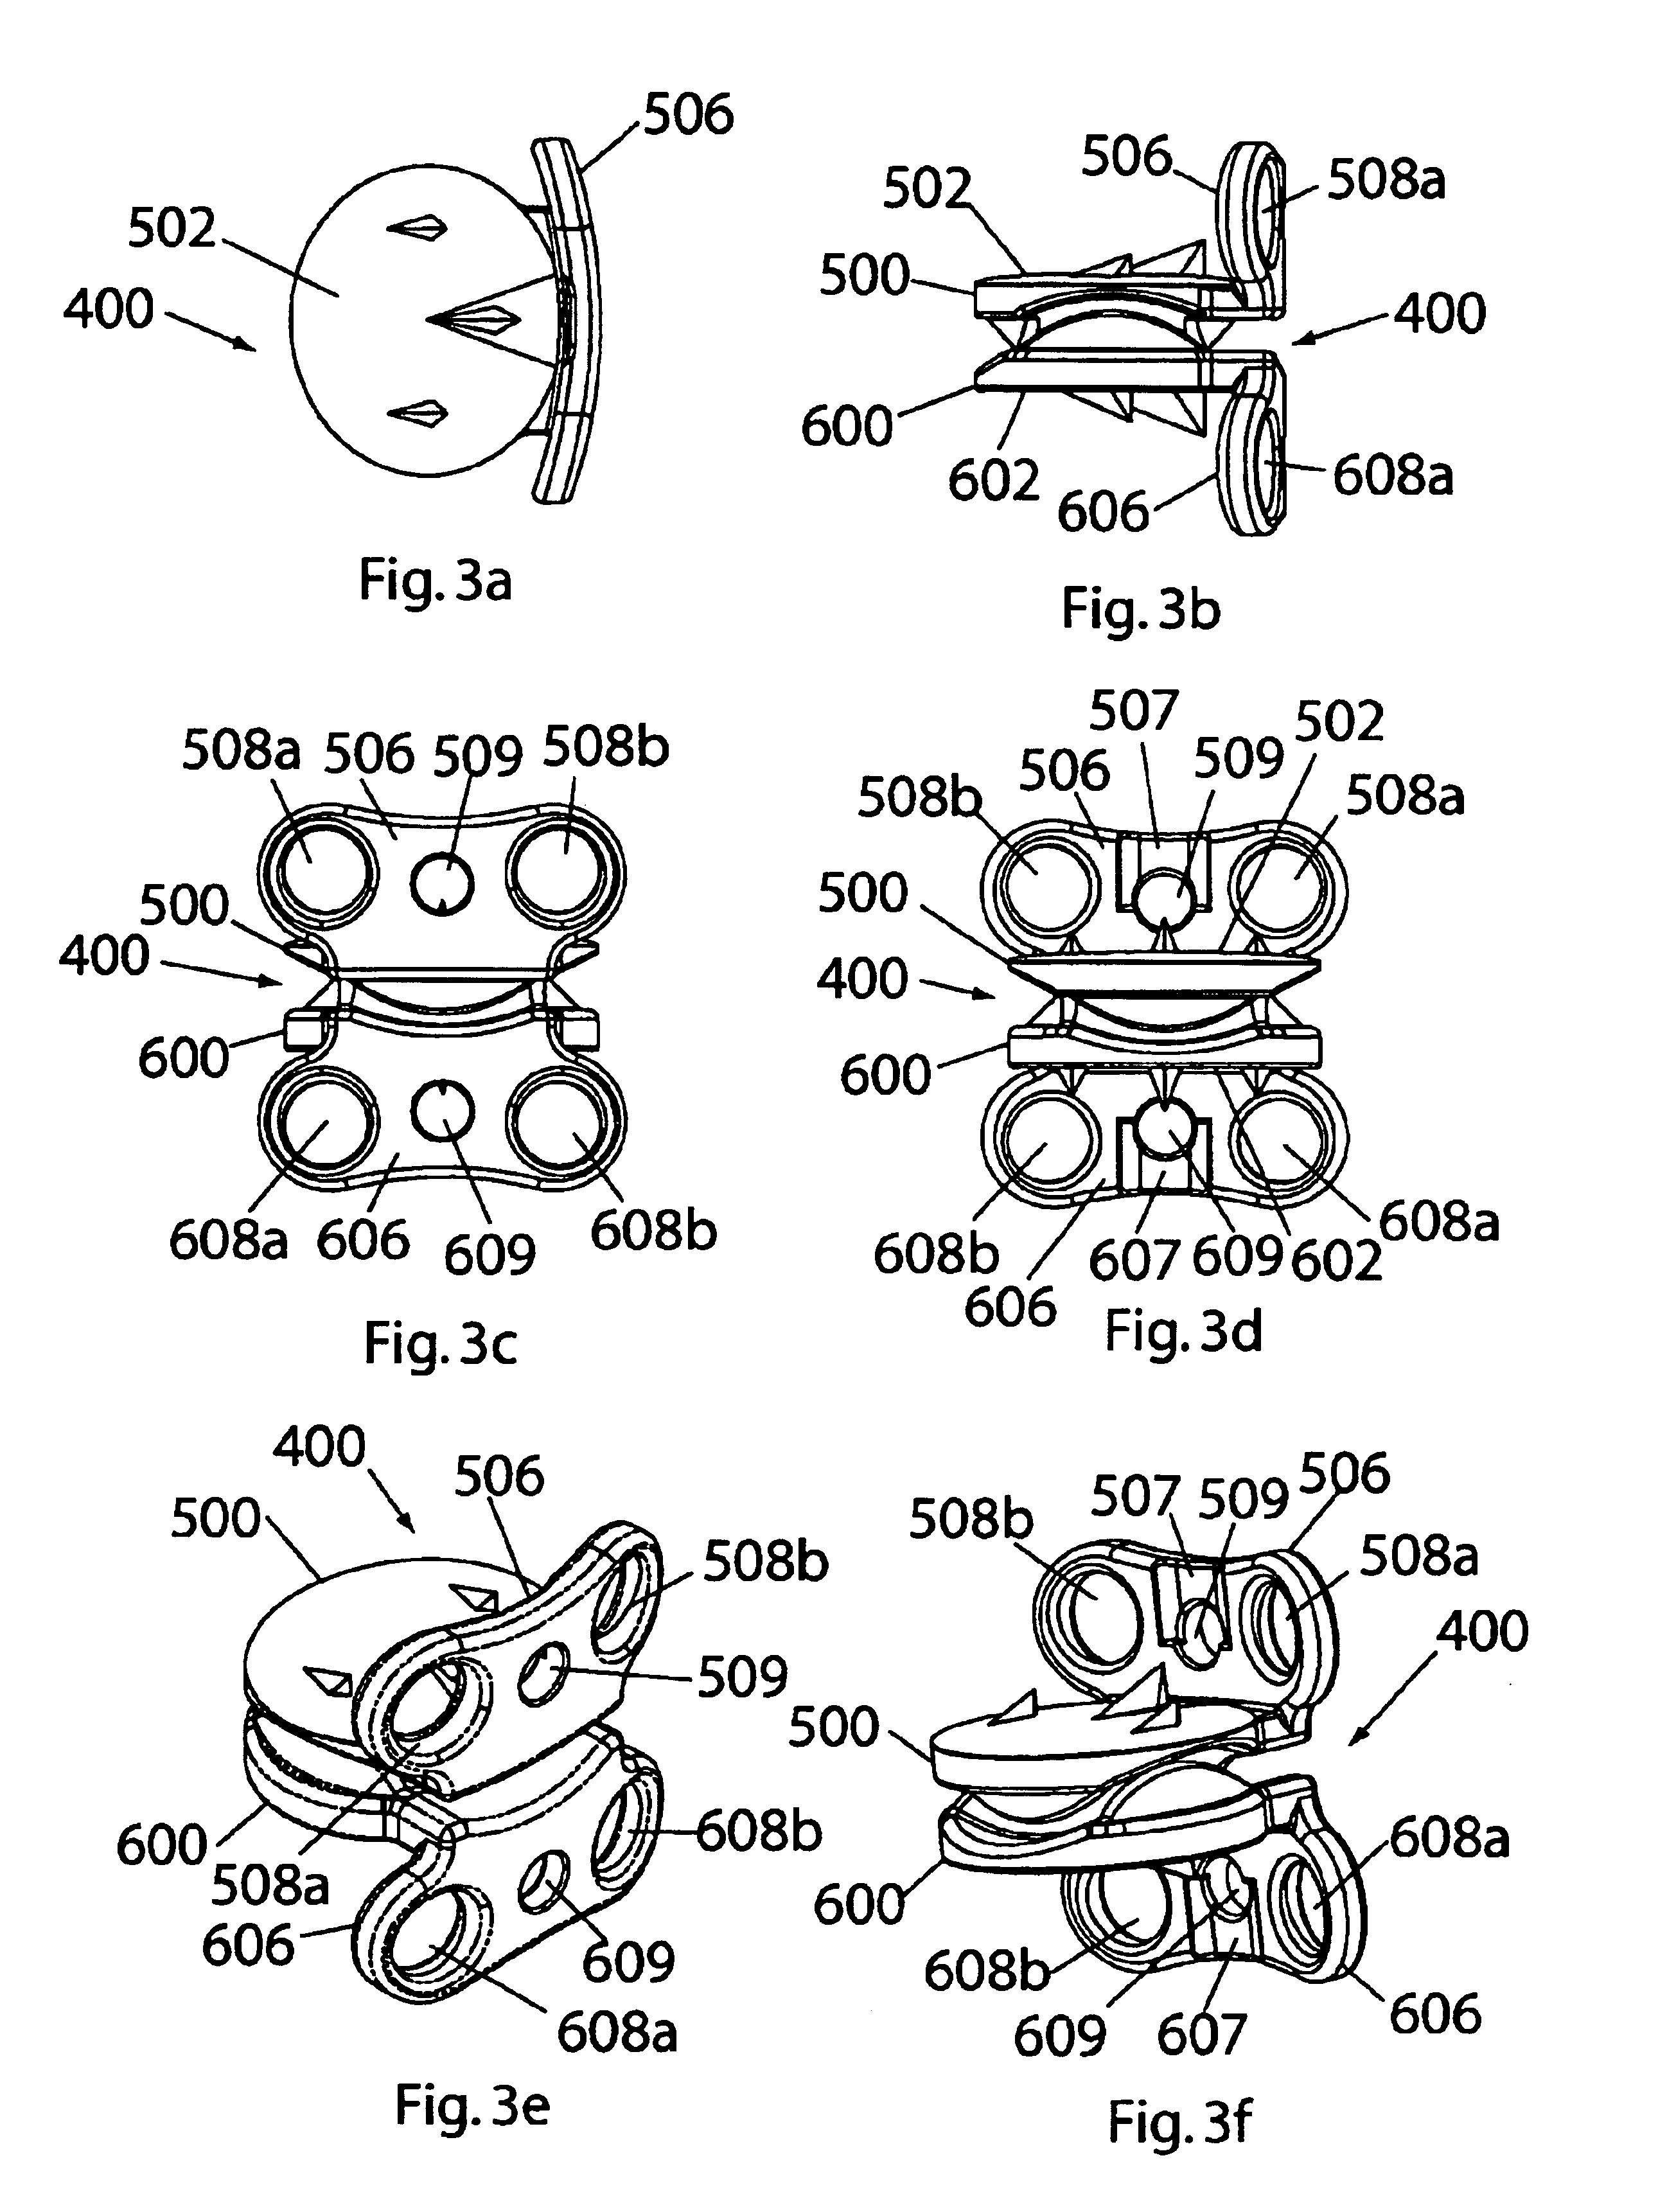 Instrumentation and methods for use in implanting a cervical disc replacement device